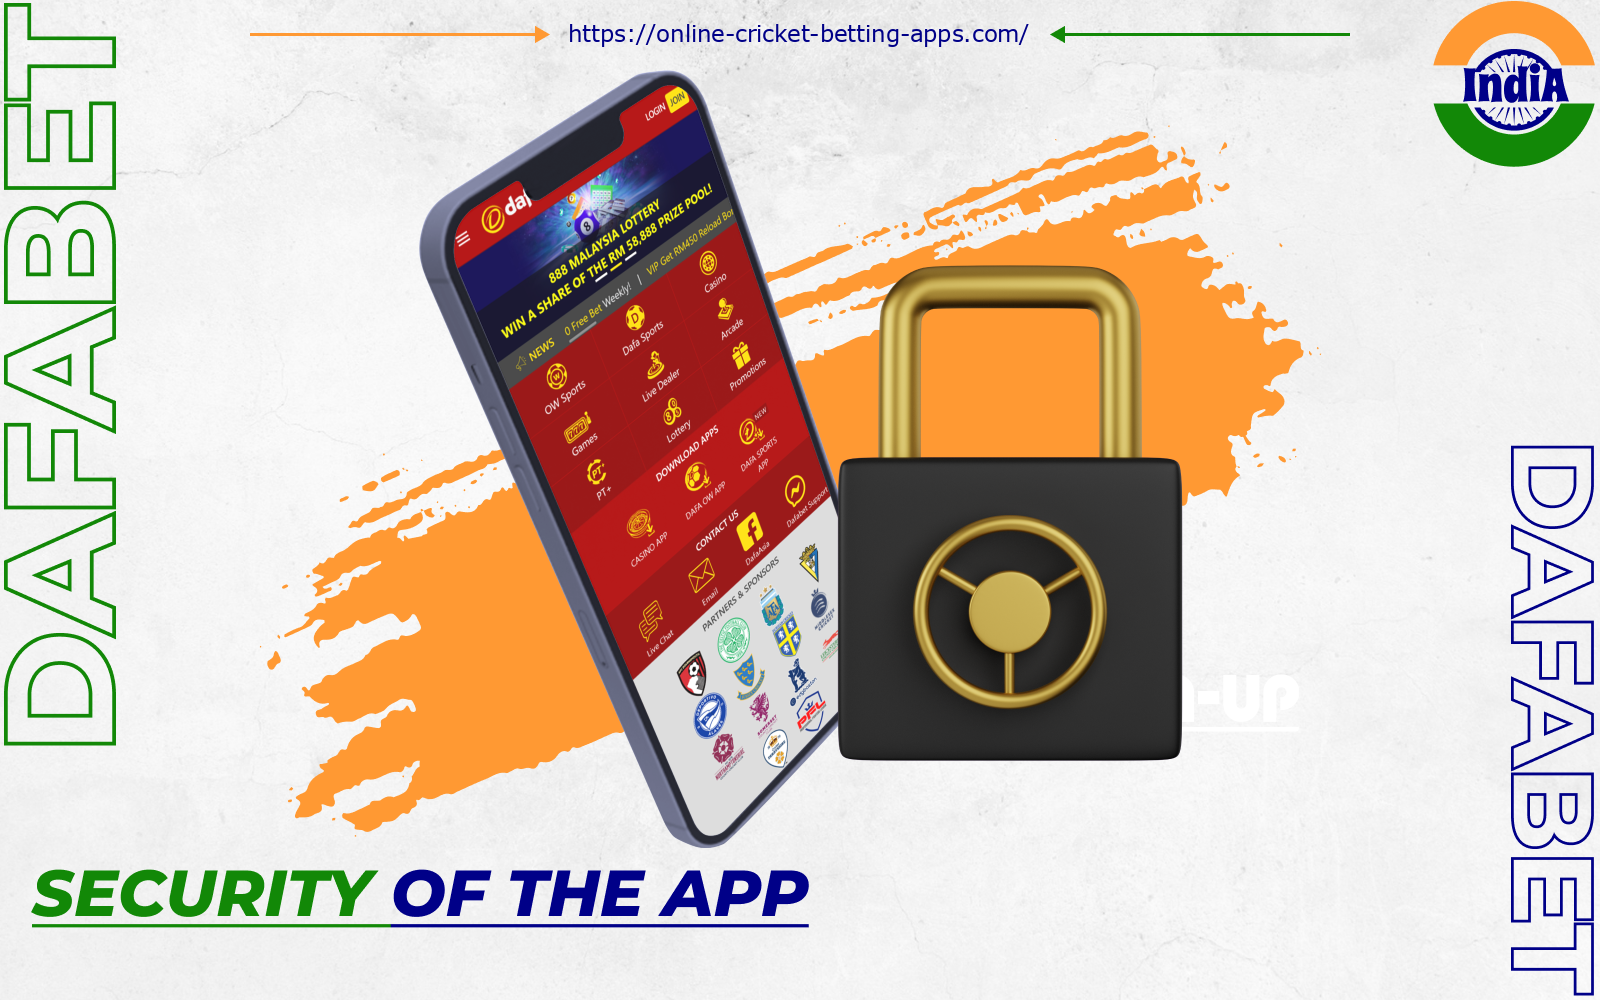 Dafabet has all the tools to keep Indian users' data and money as safe as possible